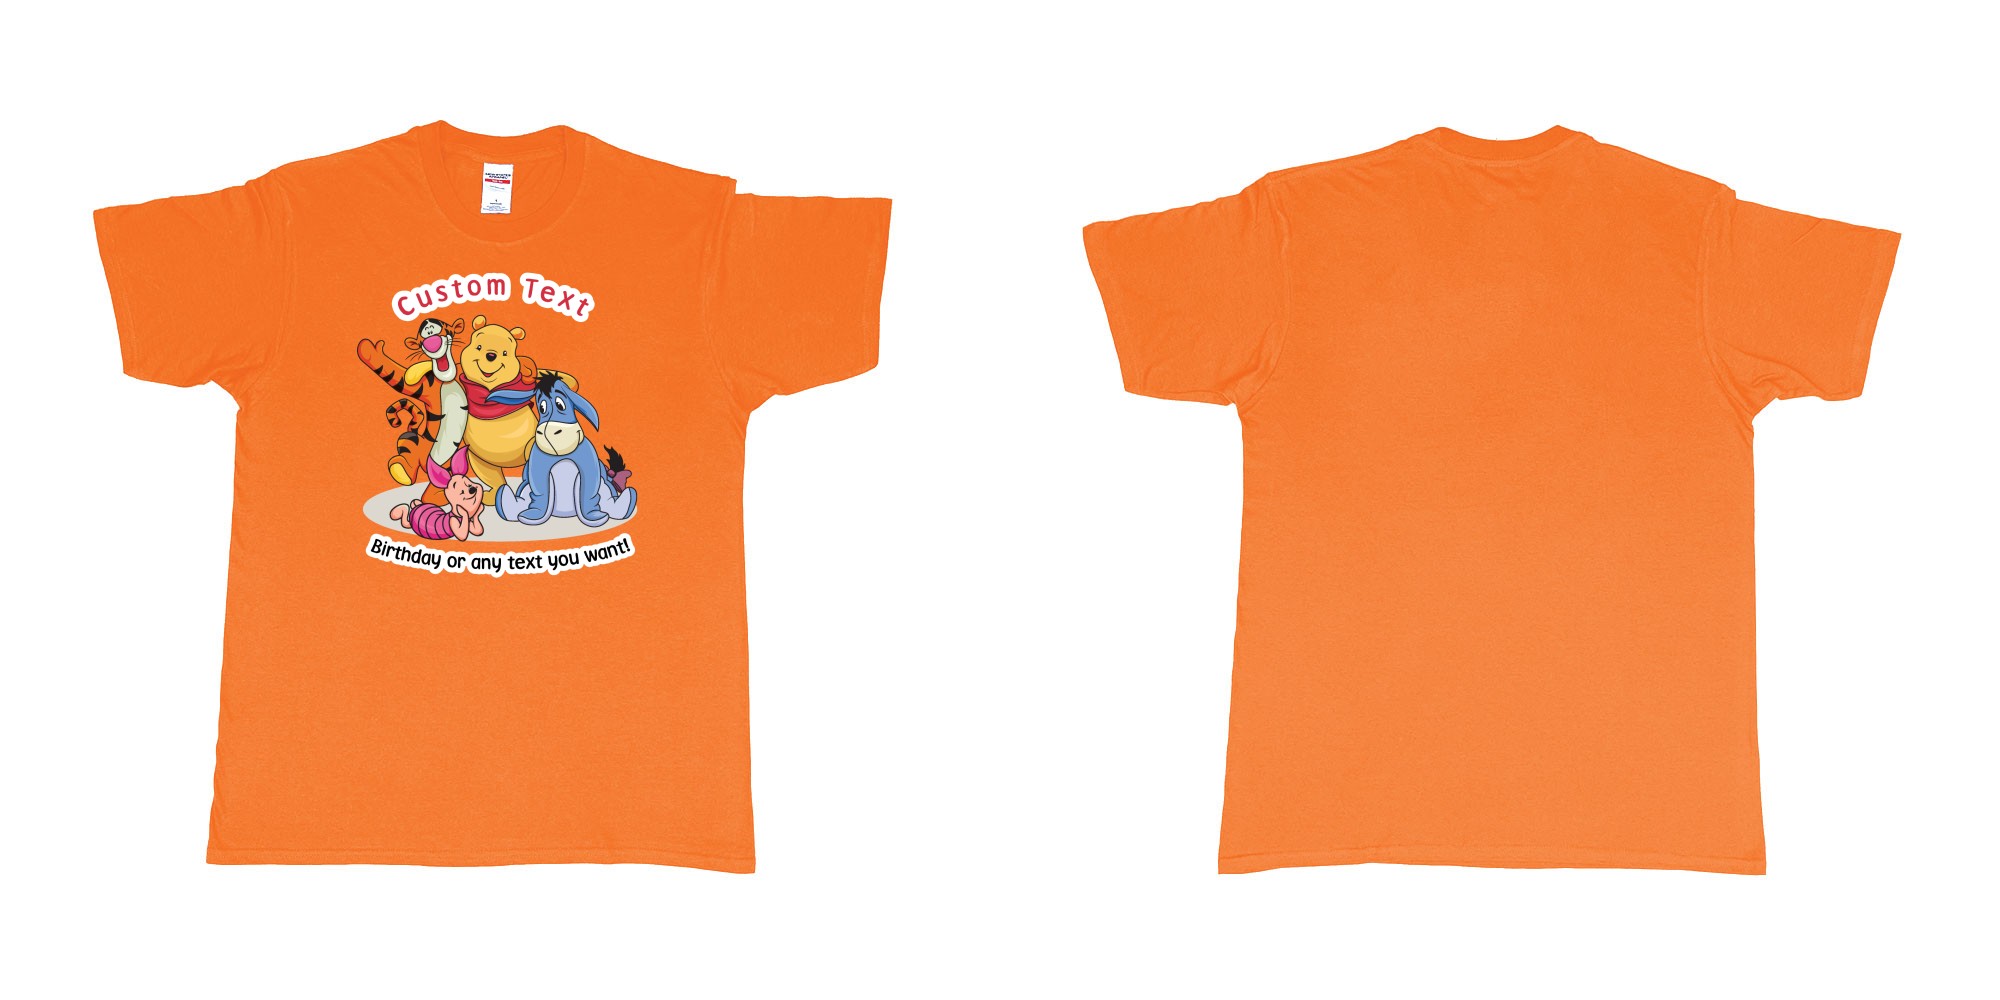 Custom tshirt design winnie the pooh and friend in fabric color orange choice your own text made in Bali by The Pirate Way